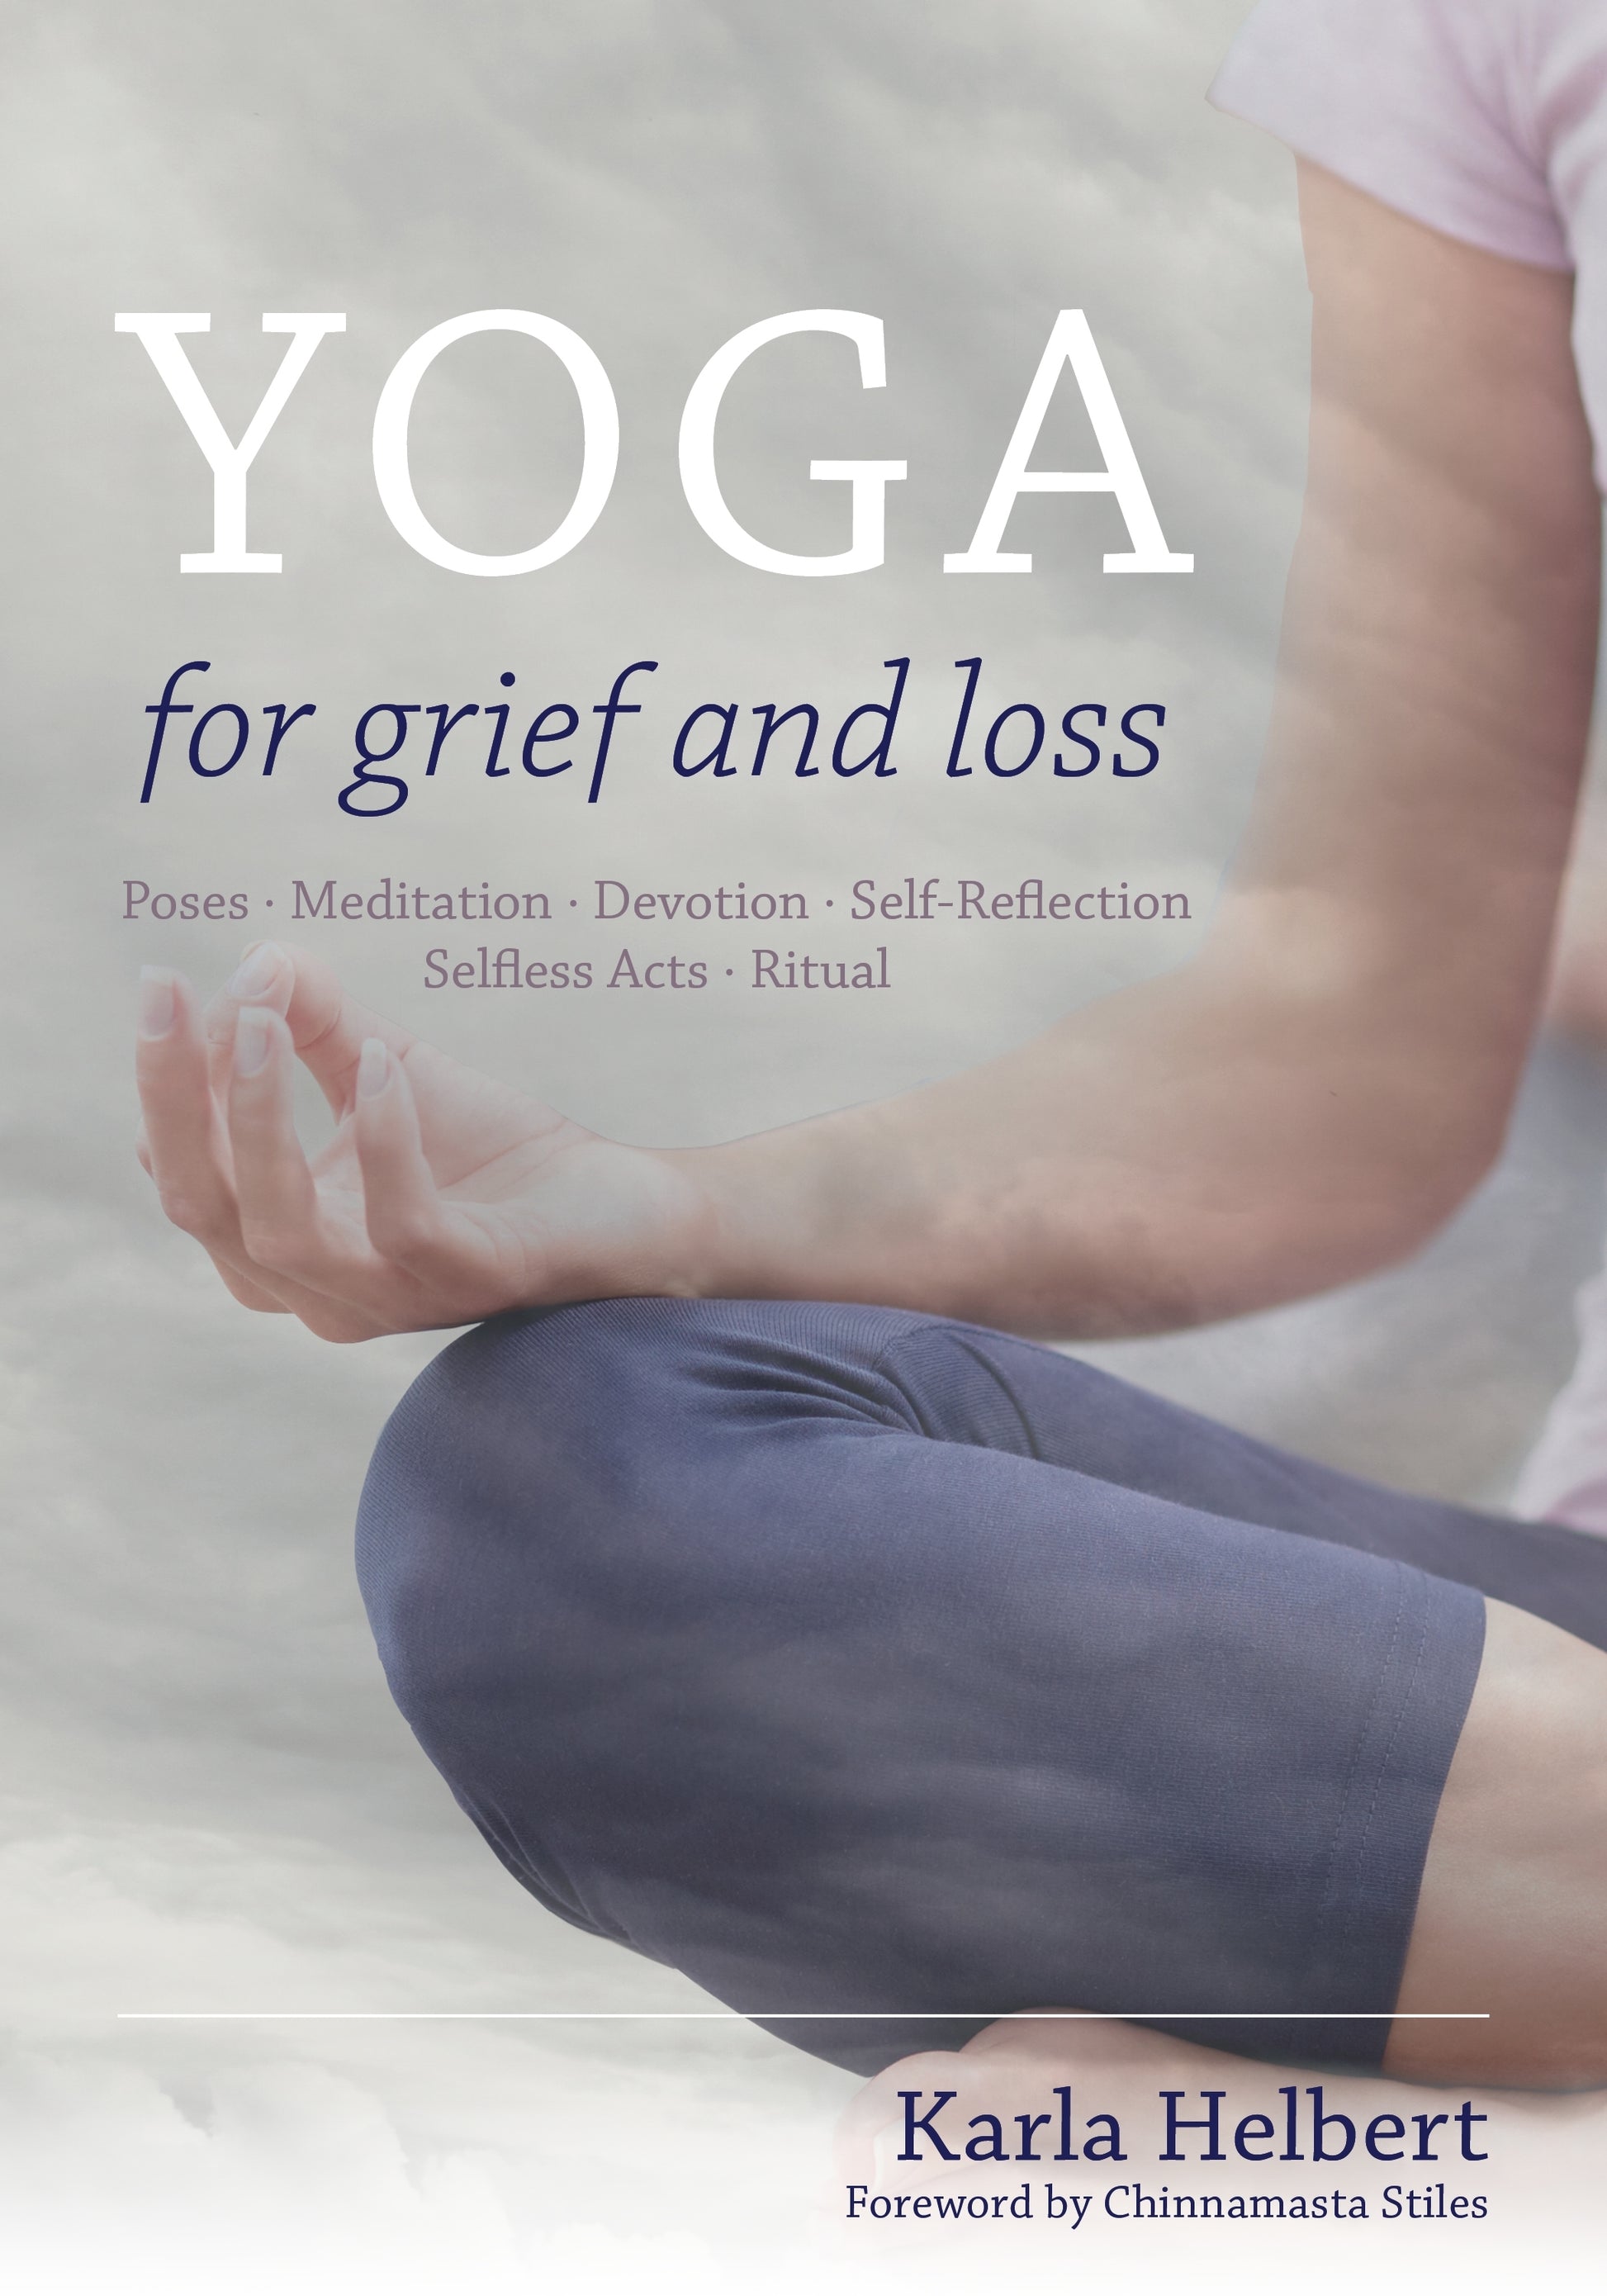 Yoga for Grief and Loss by Karla Helbert, Chinnamasta Stiles